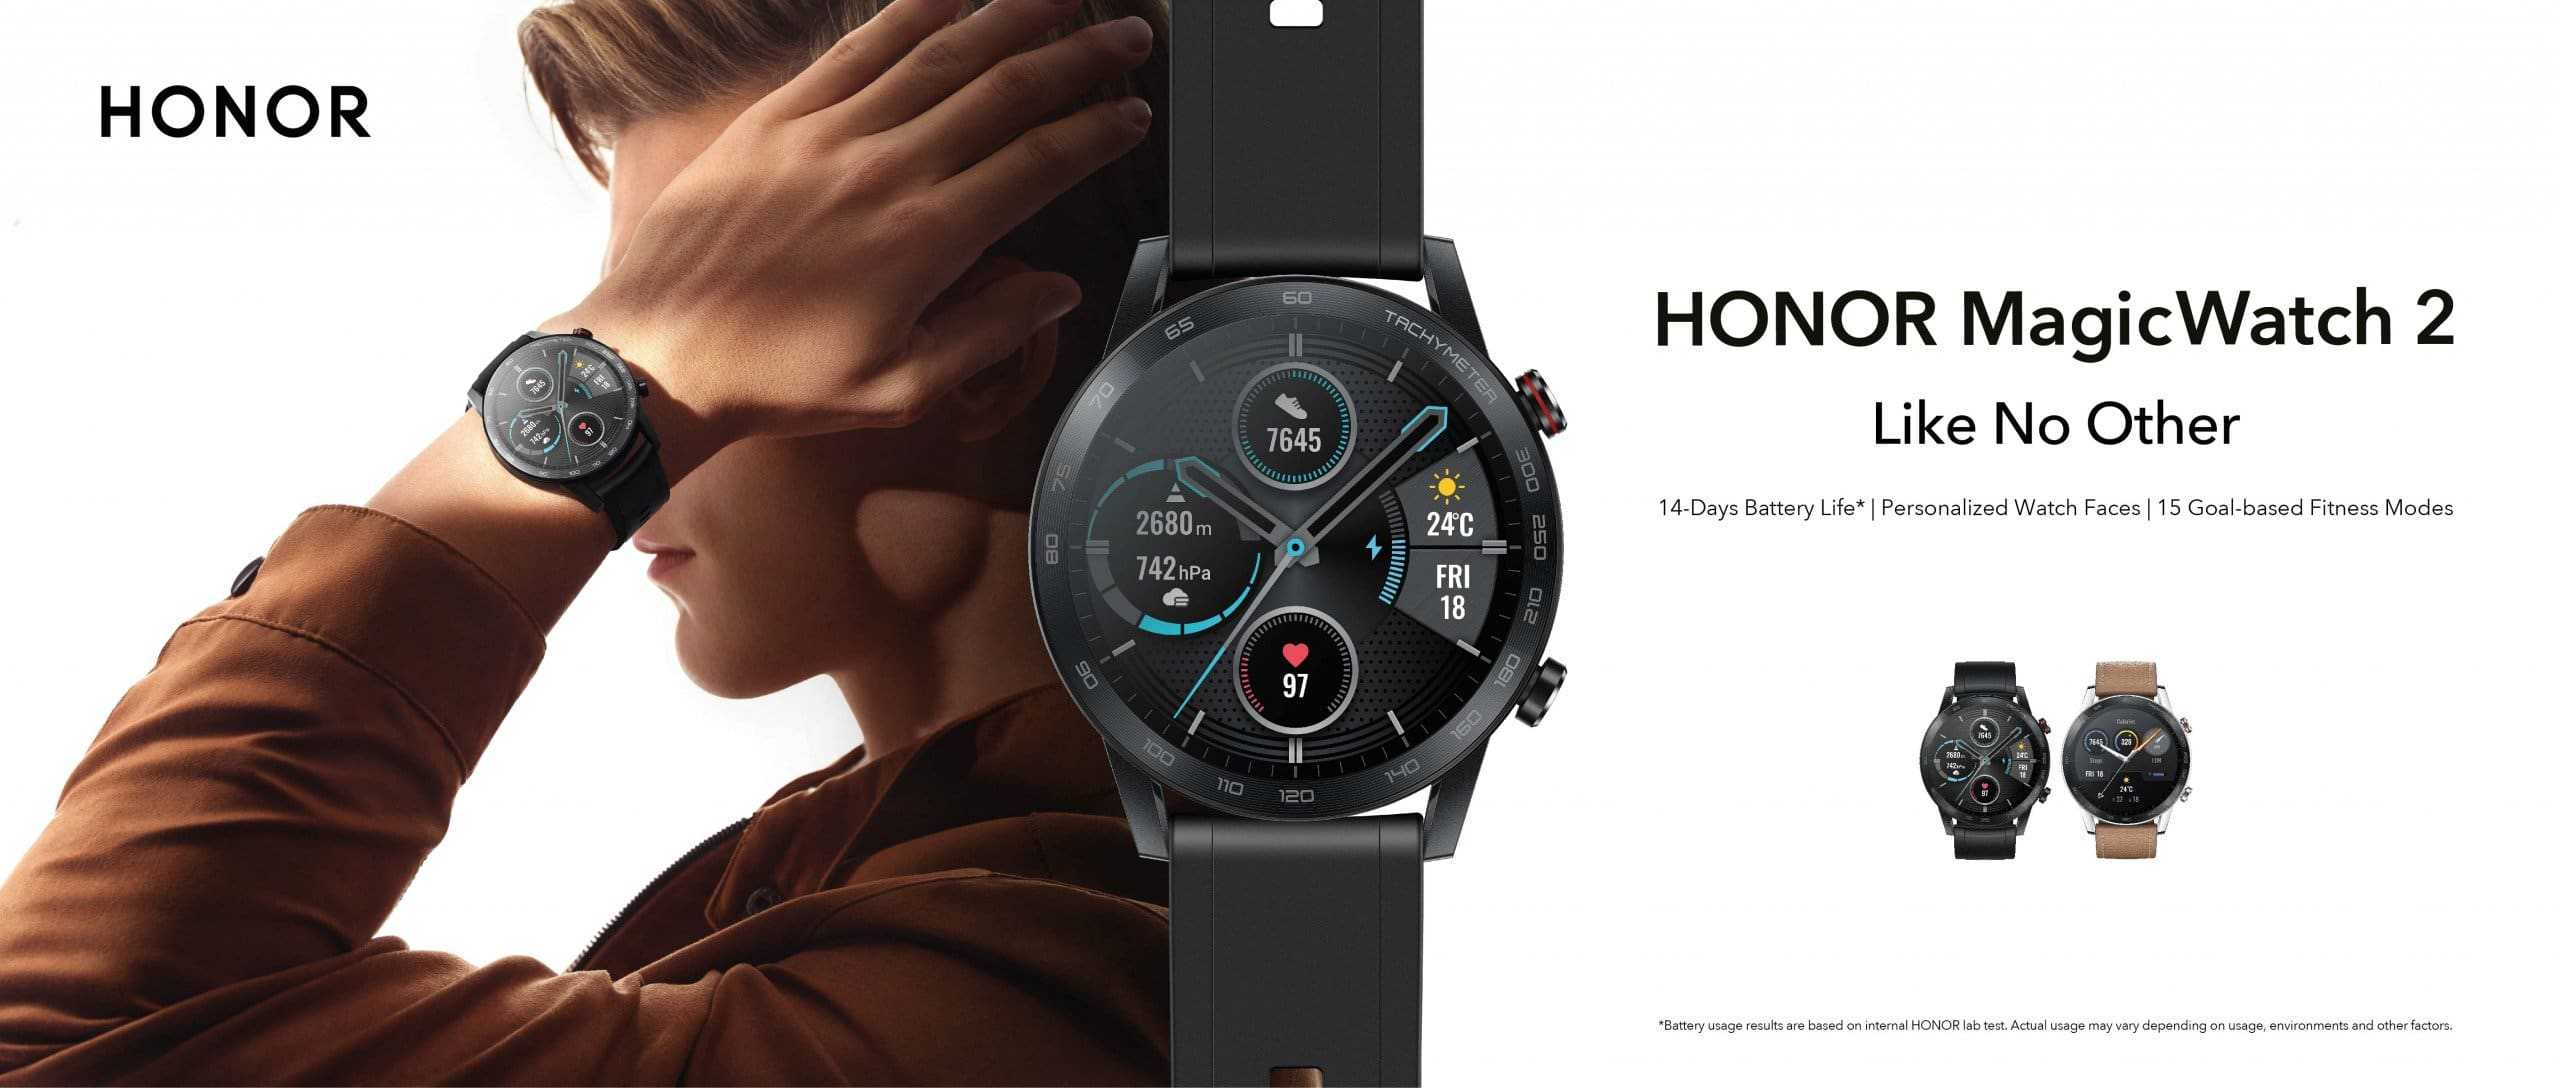 HONOR Launches HONOR MagicWatch 2 in the UAE